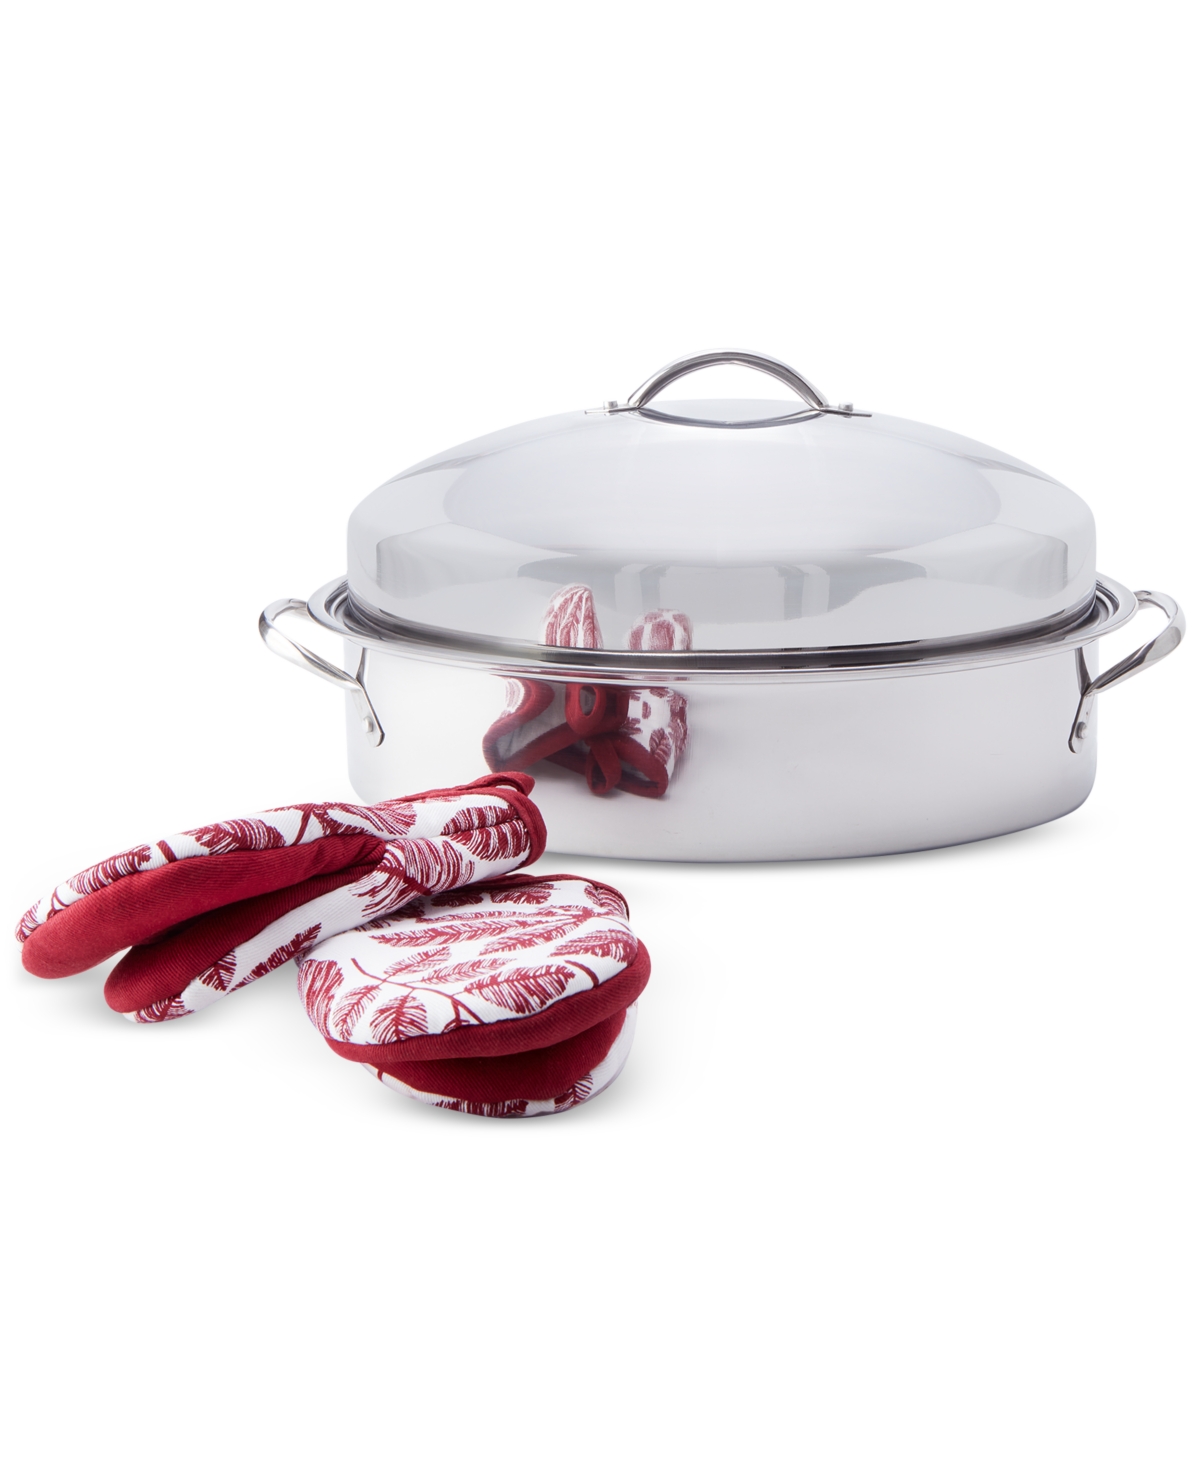 The Cellar Stainless Steel 8-qt Covered Oval Roaster With Rack, Created For Macy's